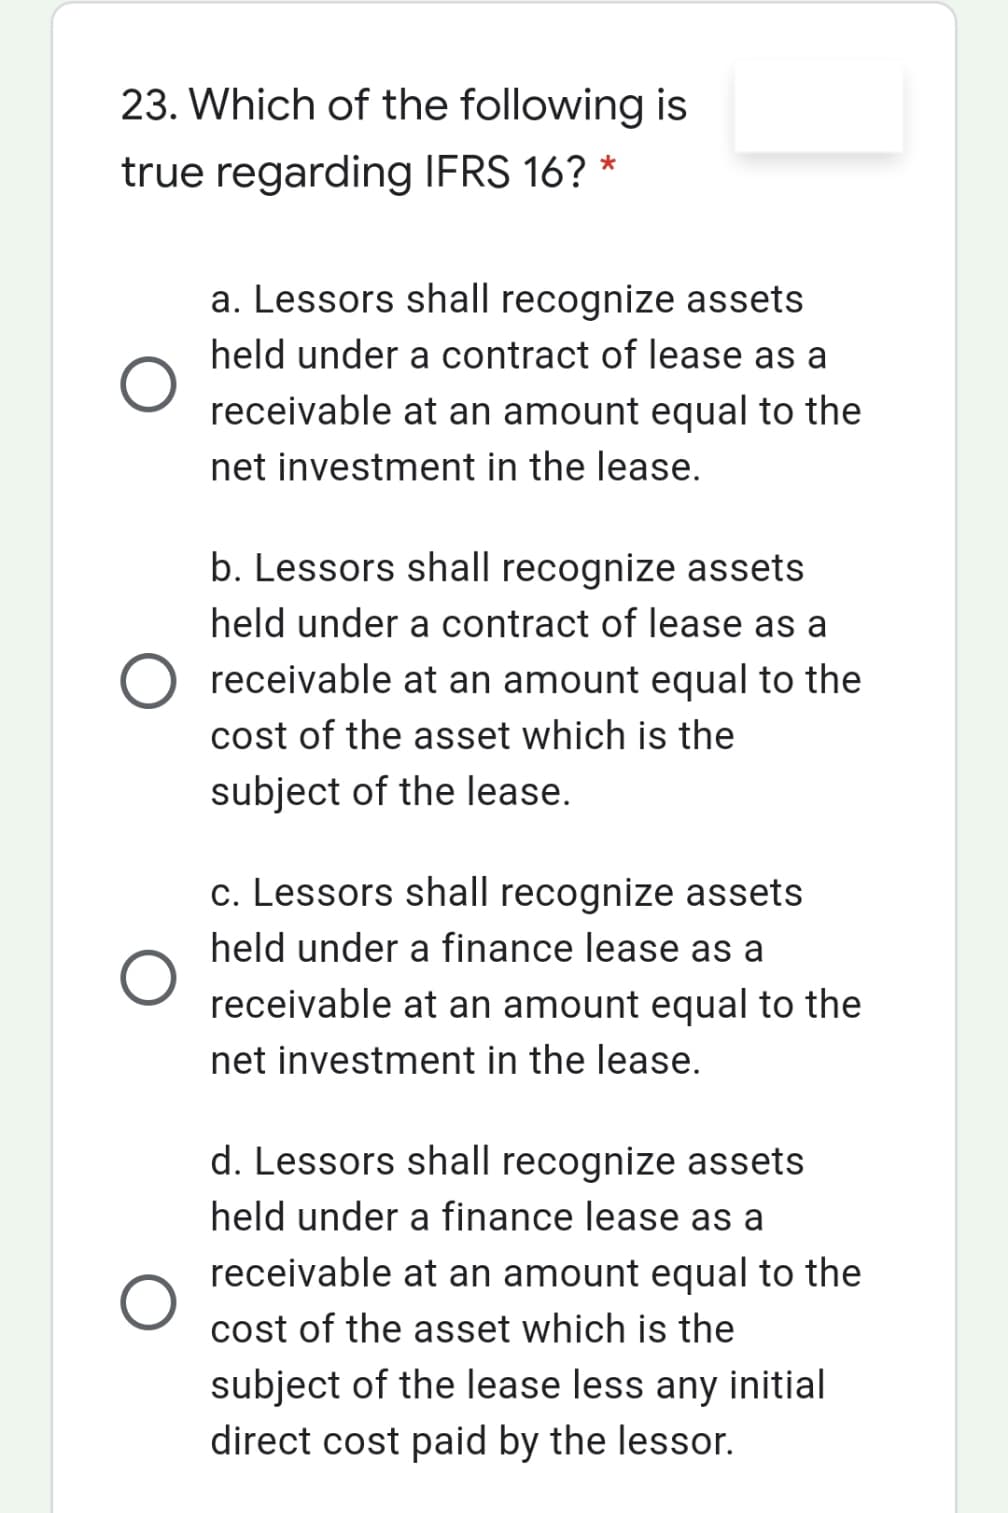 23. Which of the following is
true regarding IFRS 16? *
a. Lessors shall recognize assets
held under a contract of lease as a
receivable at an amount equal to the
net investment in the lease.
b. Lessors shall recognize assets
held under a contract of lease as a
O receivable at an amount equal to the
cost of the asset which is the
subject of the lease.
c. Lessors shall recognize assets
held under a finance lease as a
receivable at an amount equal to the
net investment in the lease.
d. Lessors shall recognize assets
held under a finance lease as a
receivable at an amount equal to the
cost of the asset which is the
subject of the lease less any initial
direct cost paid by the lessor.
